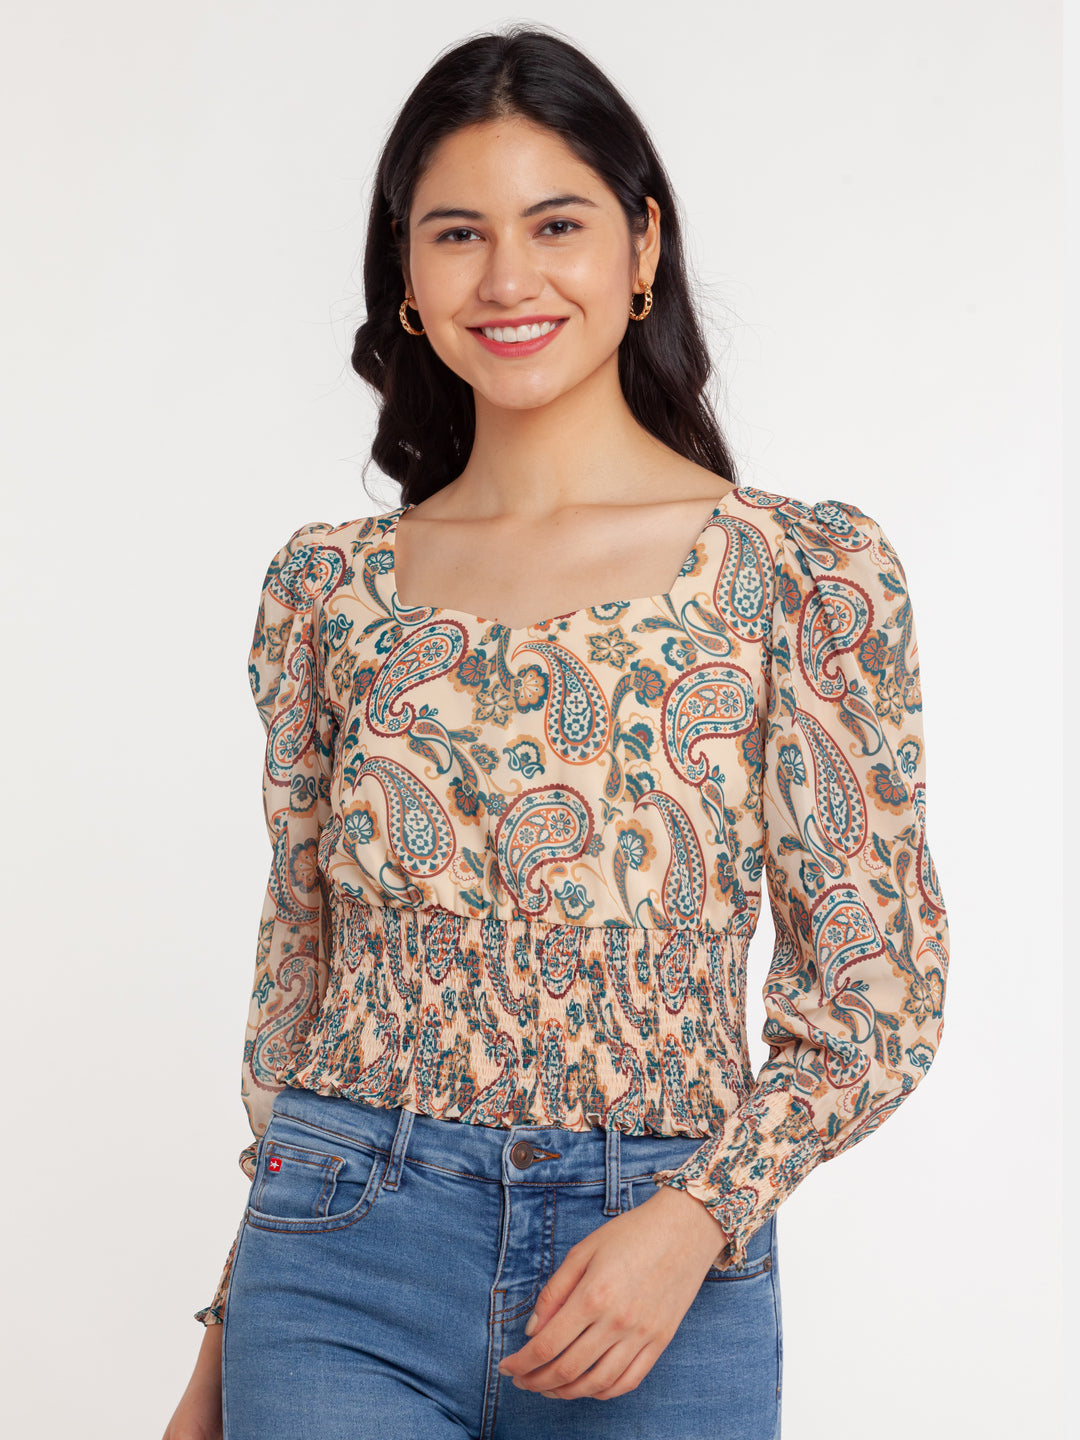 Beige Printed Smocking Top For Women